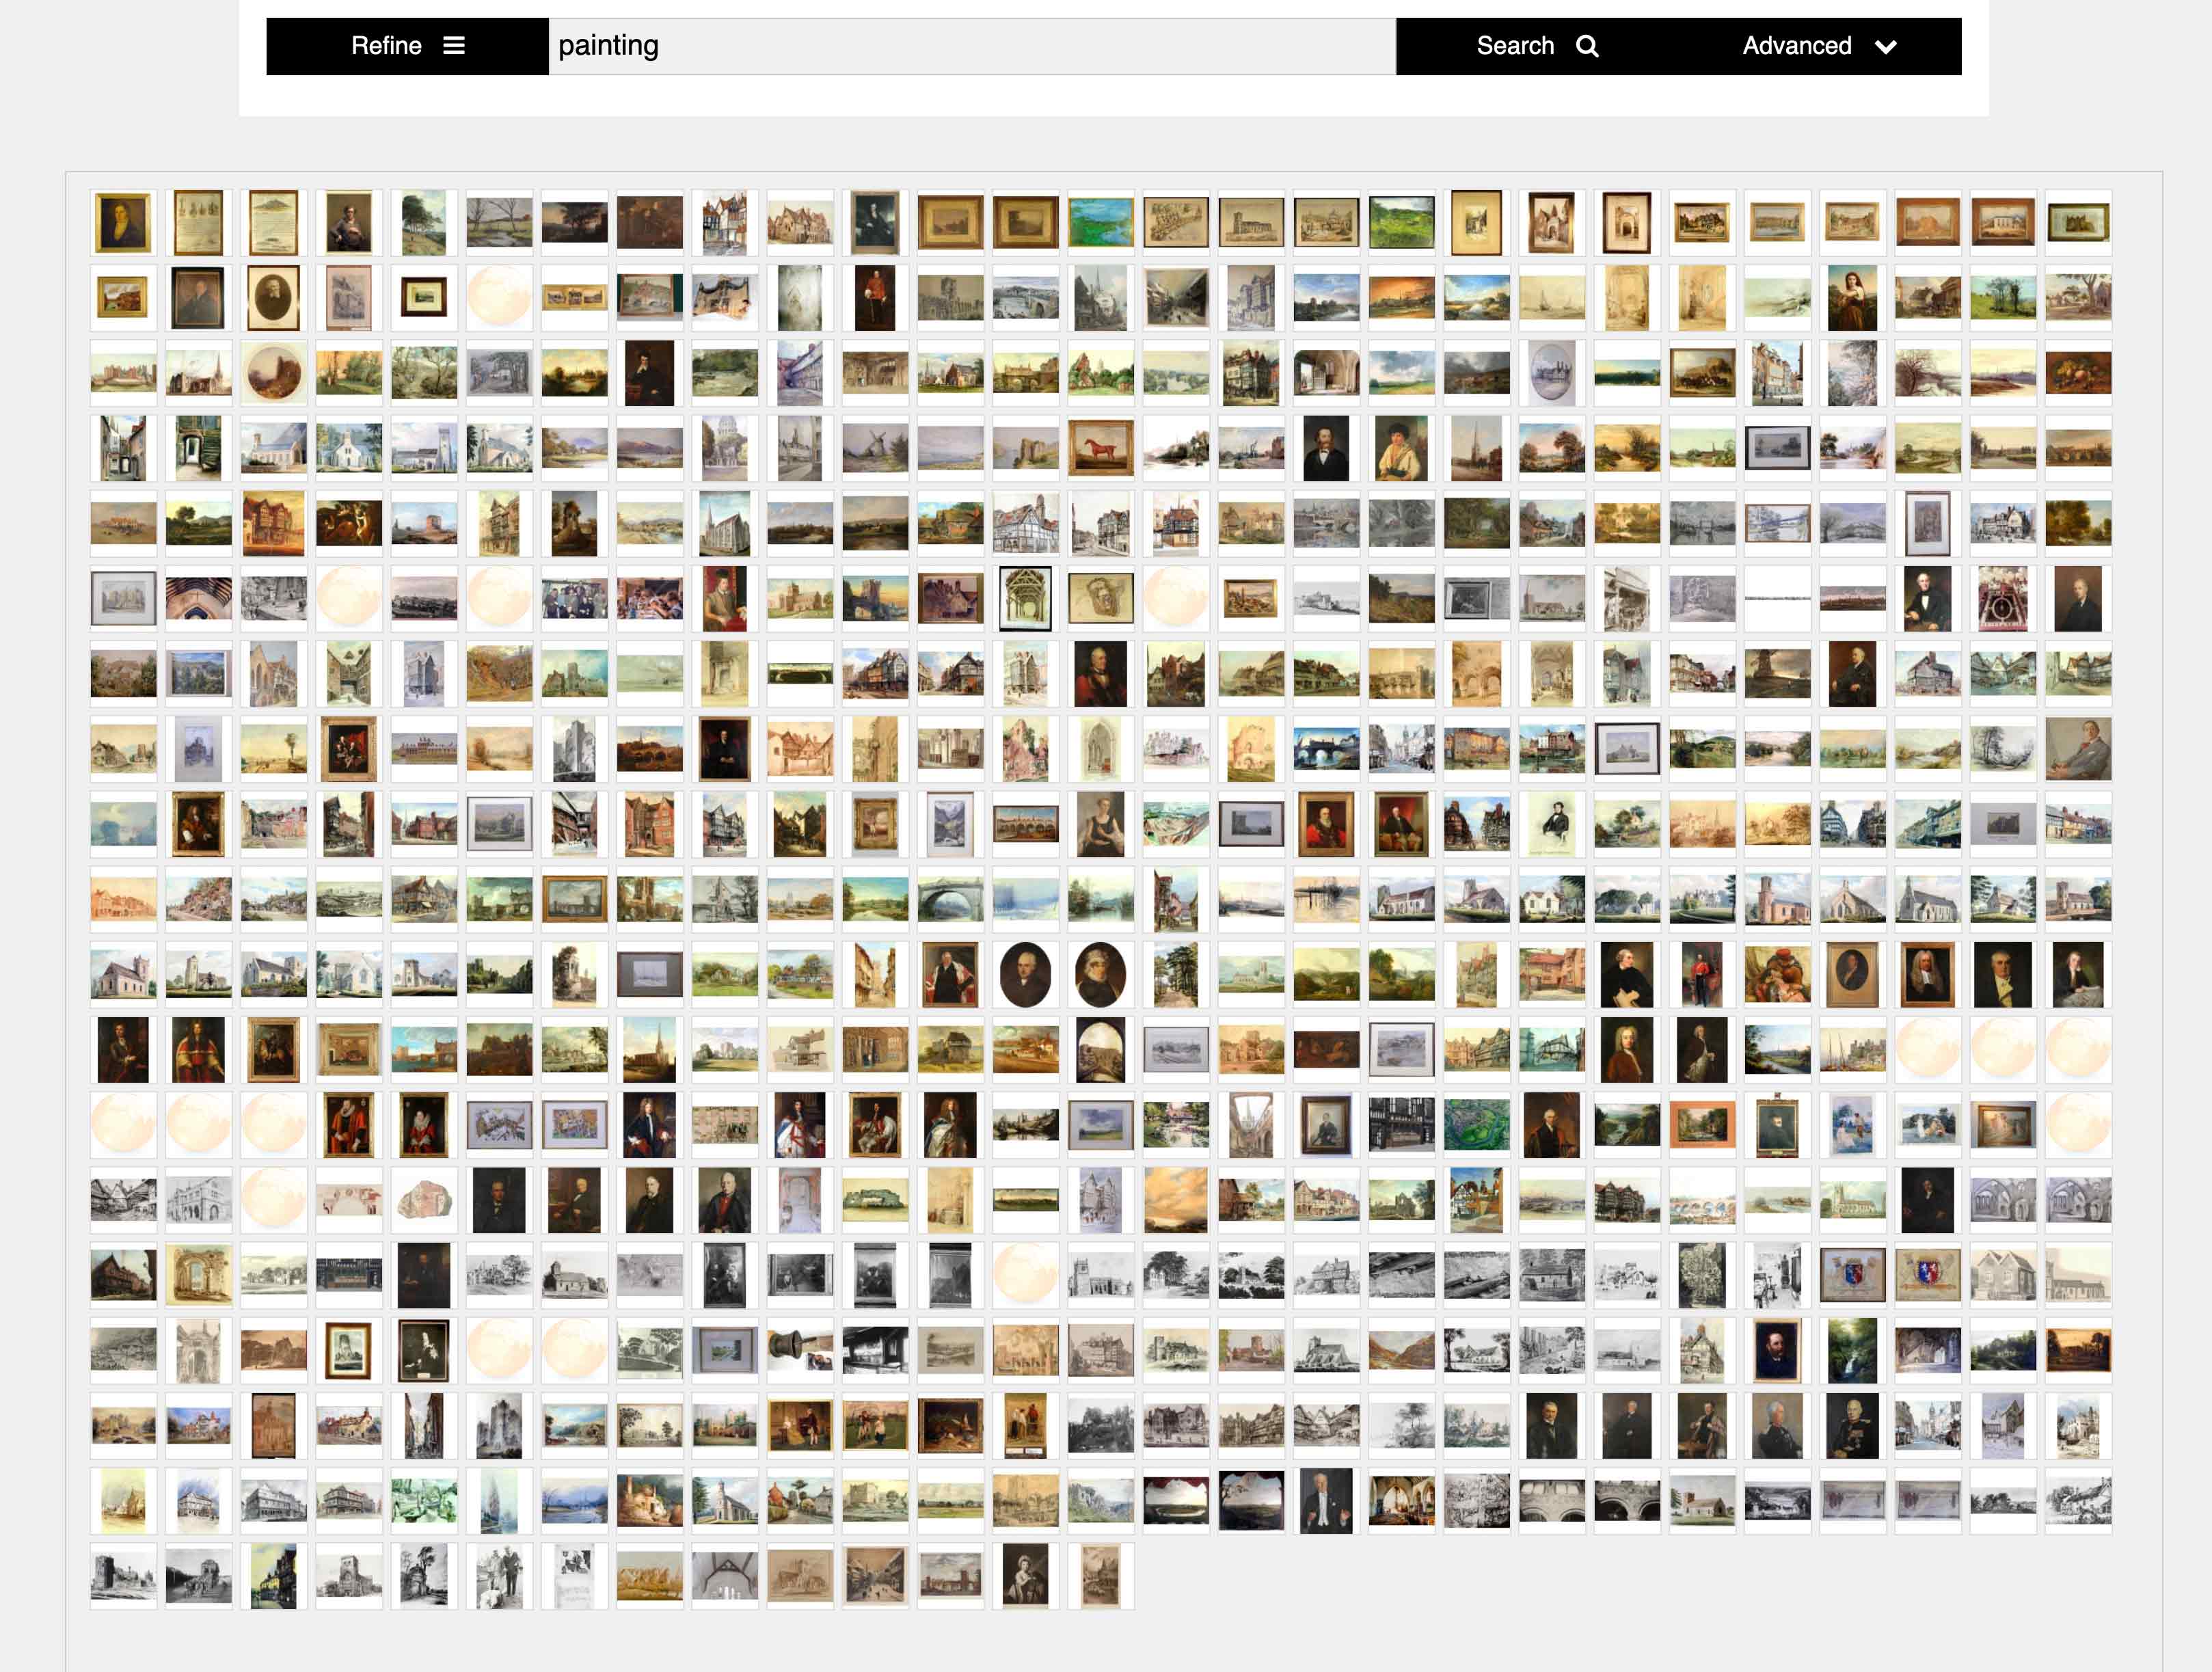 Mosaic image gallery with dynamic search and refinement